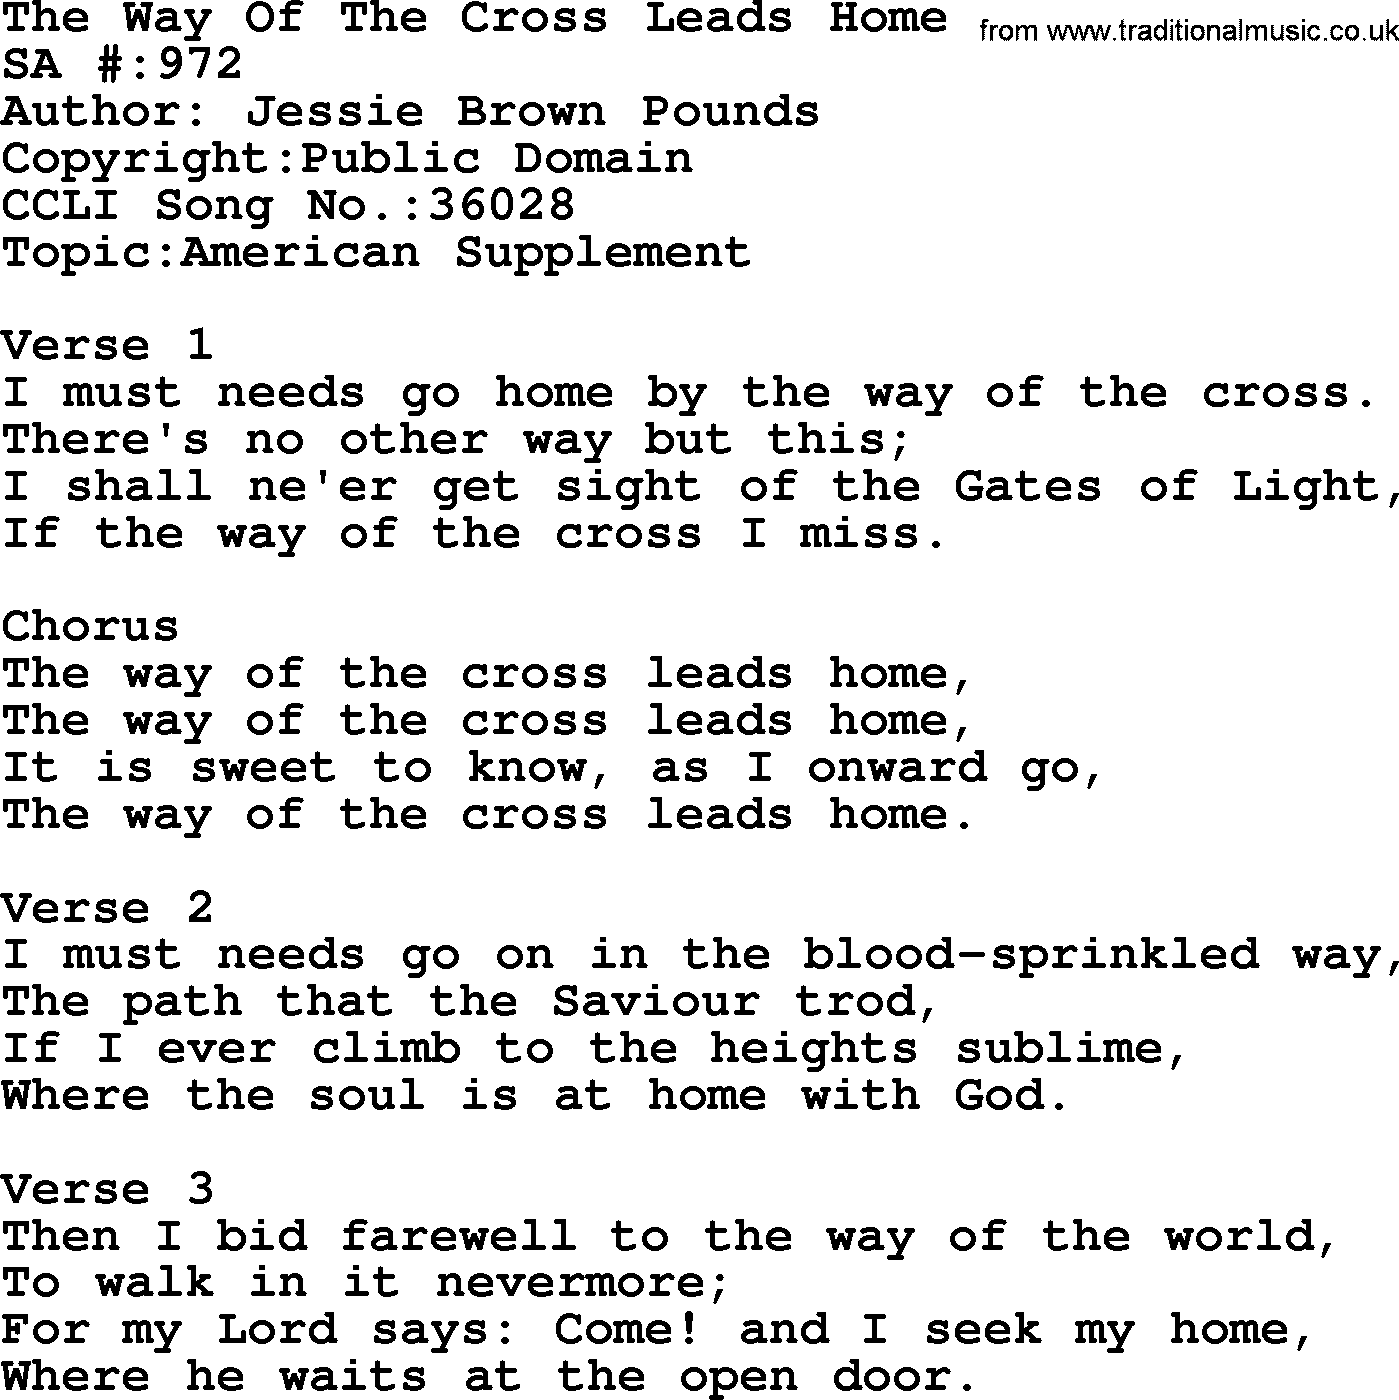 Salvation Army Hymnal, title: The Way Of The Cross Leads Home, with lyrics and PDF,